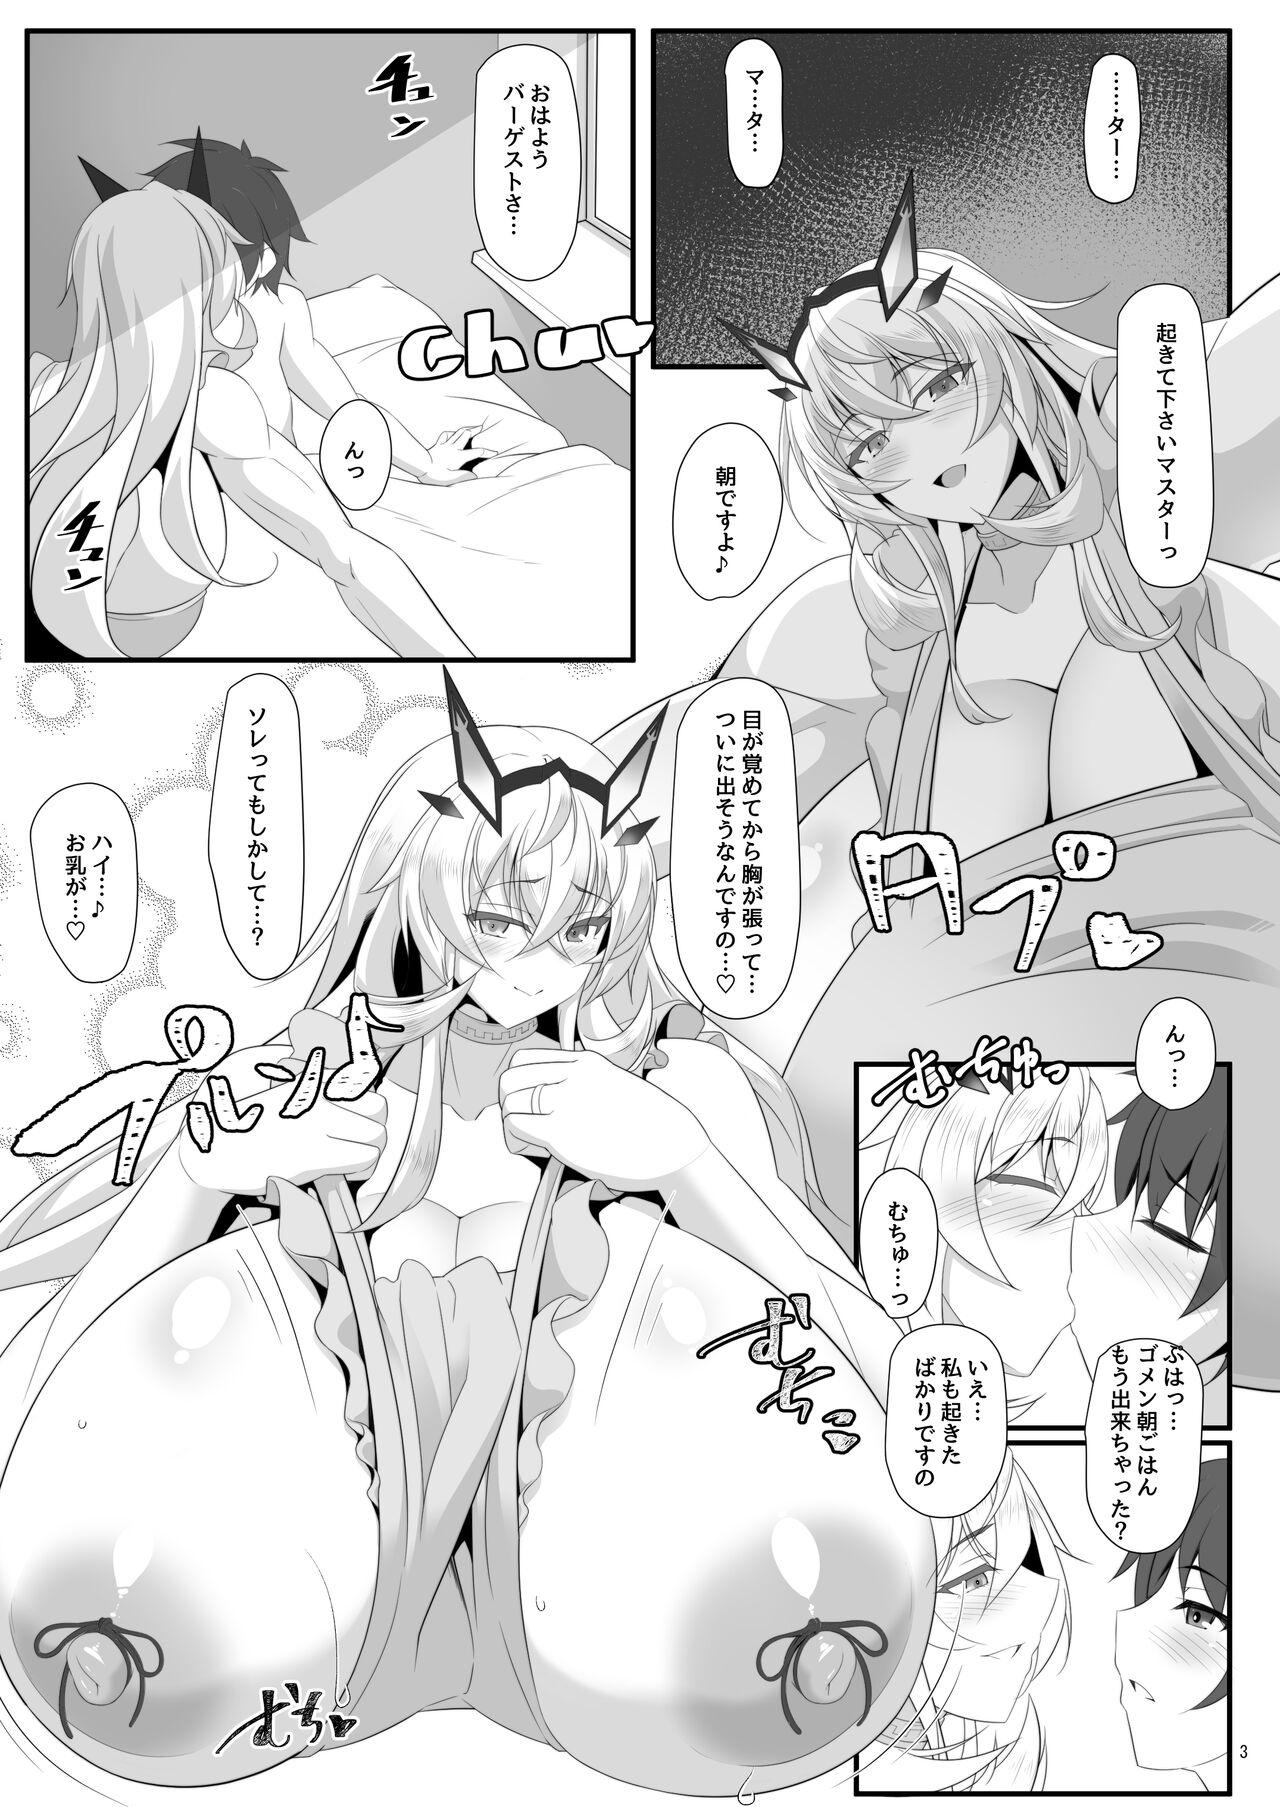 Gay Uncut barghest BREAST - Fate grand order Vagina - Page 3